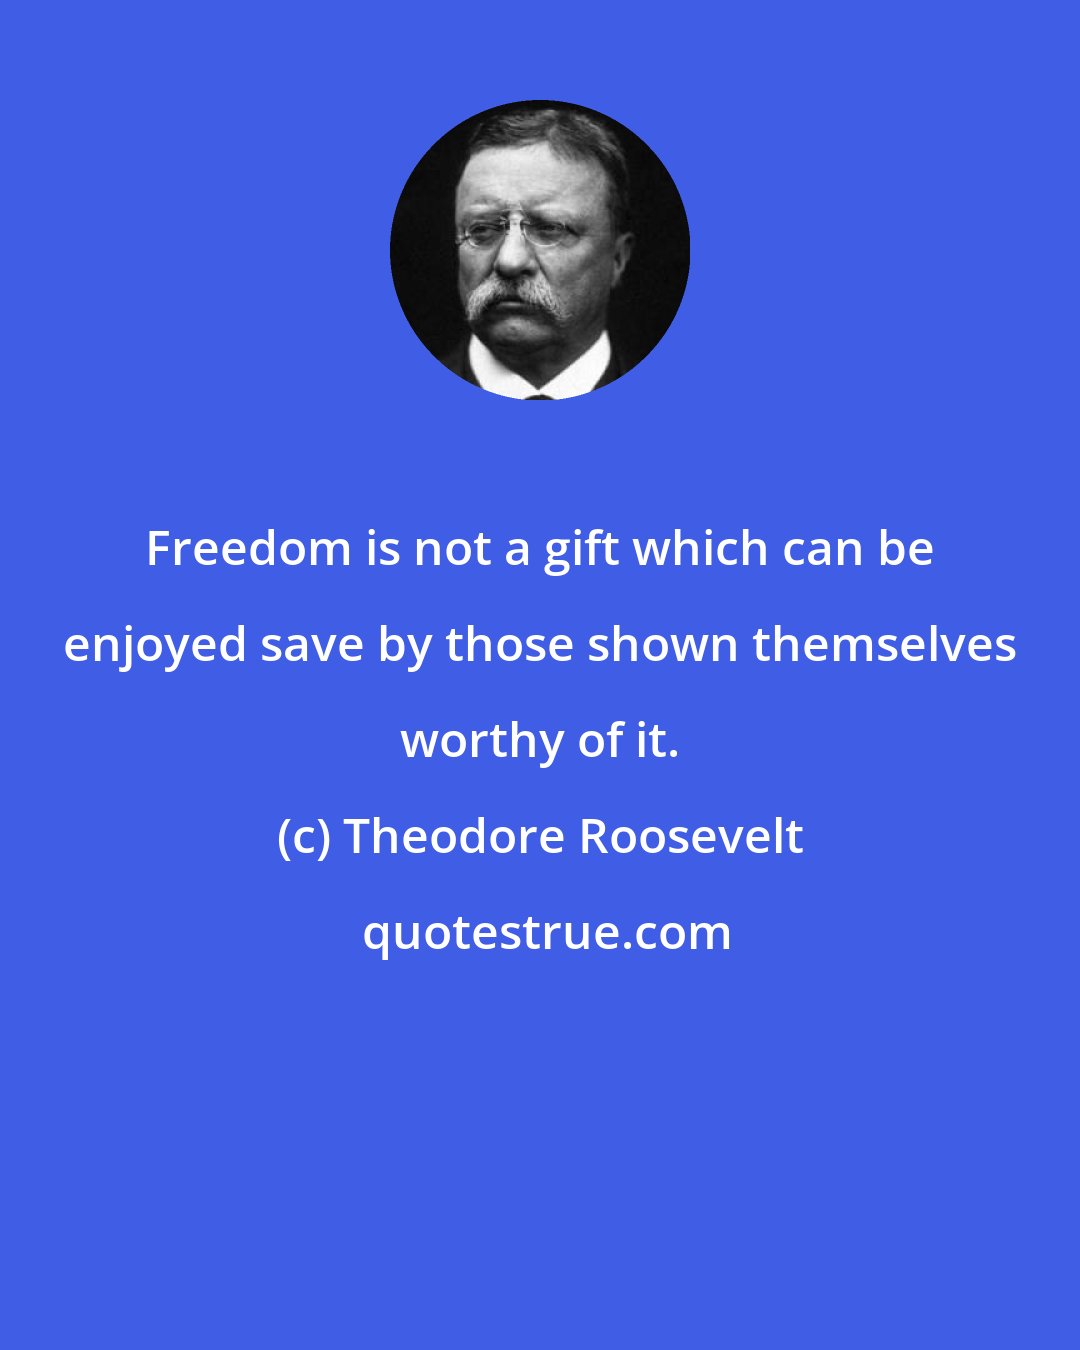 Theodore Roosevelt: Freedom is not a gift which can be enjoyed save by those shown themselves worthy of it.